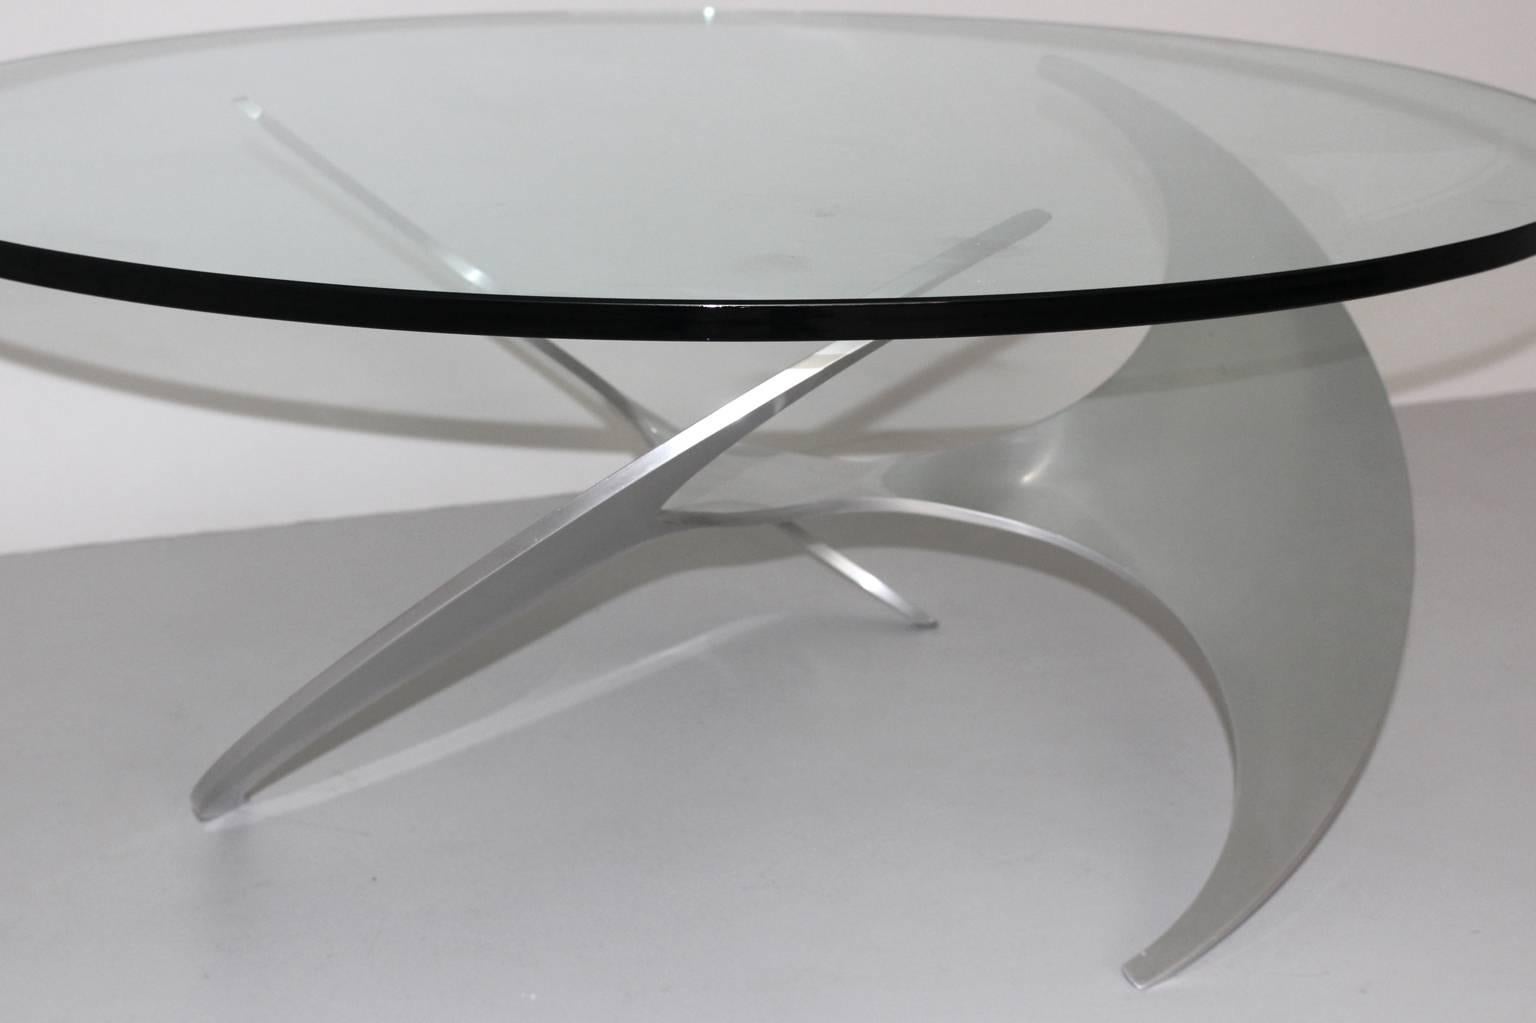 Polished Mid Century Modern Vintage Aluminum Coffee Table by Knut Hesterberg, circa 1964 For Sale